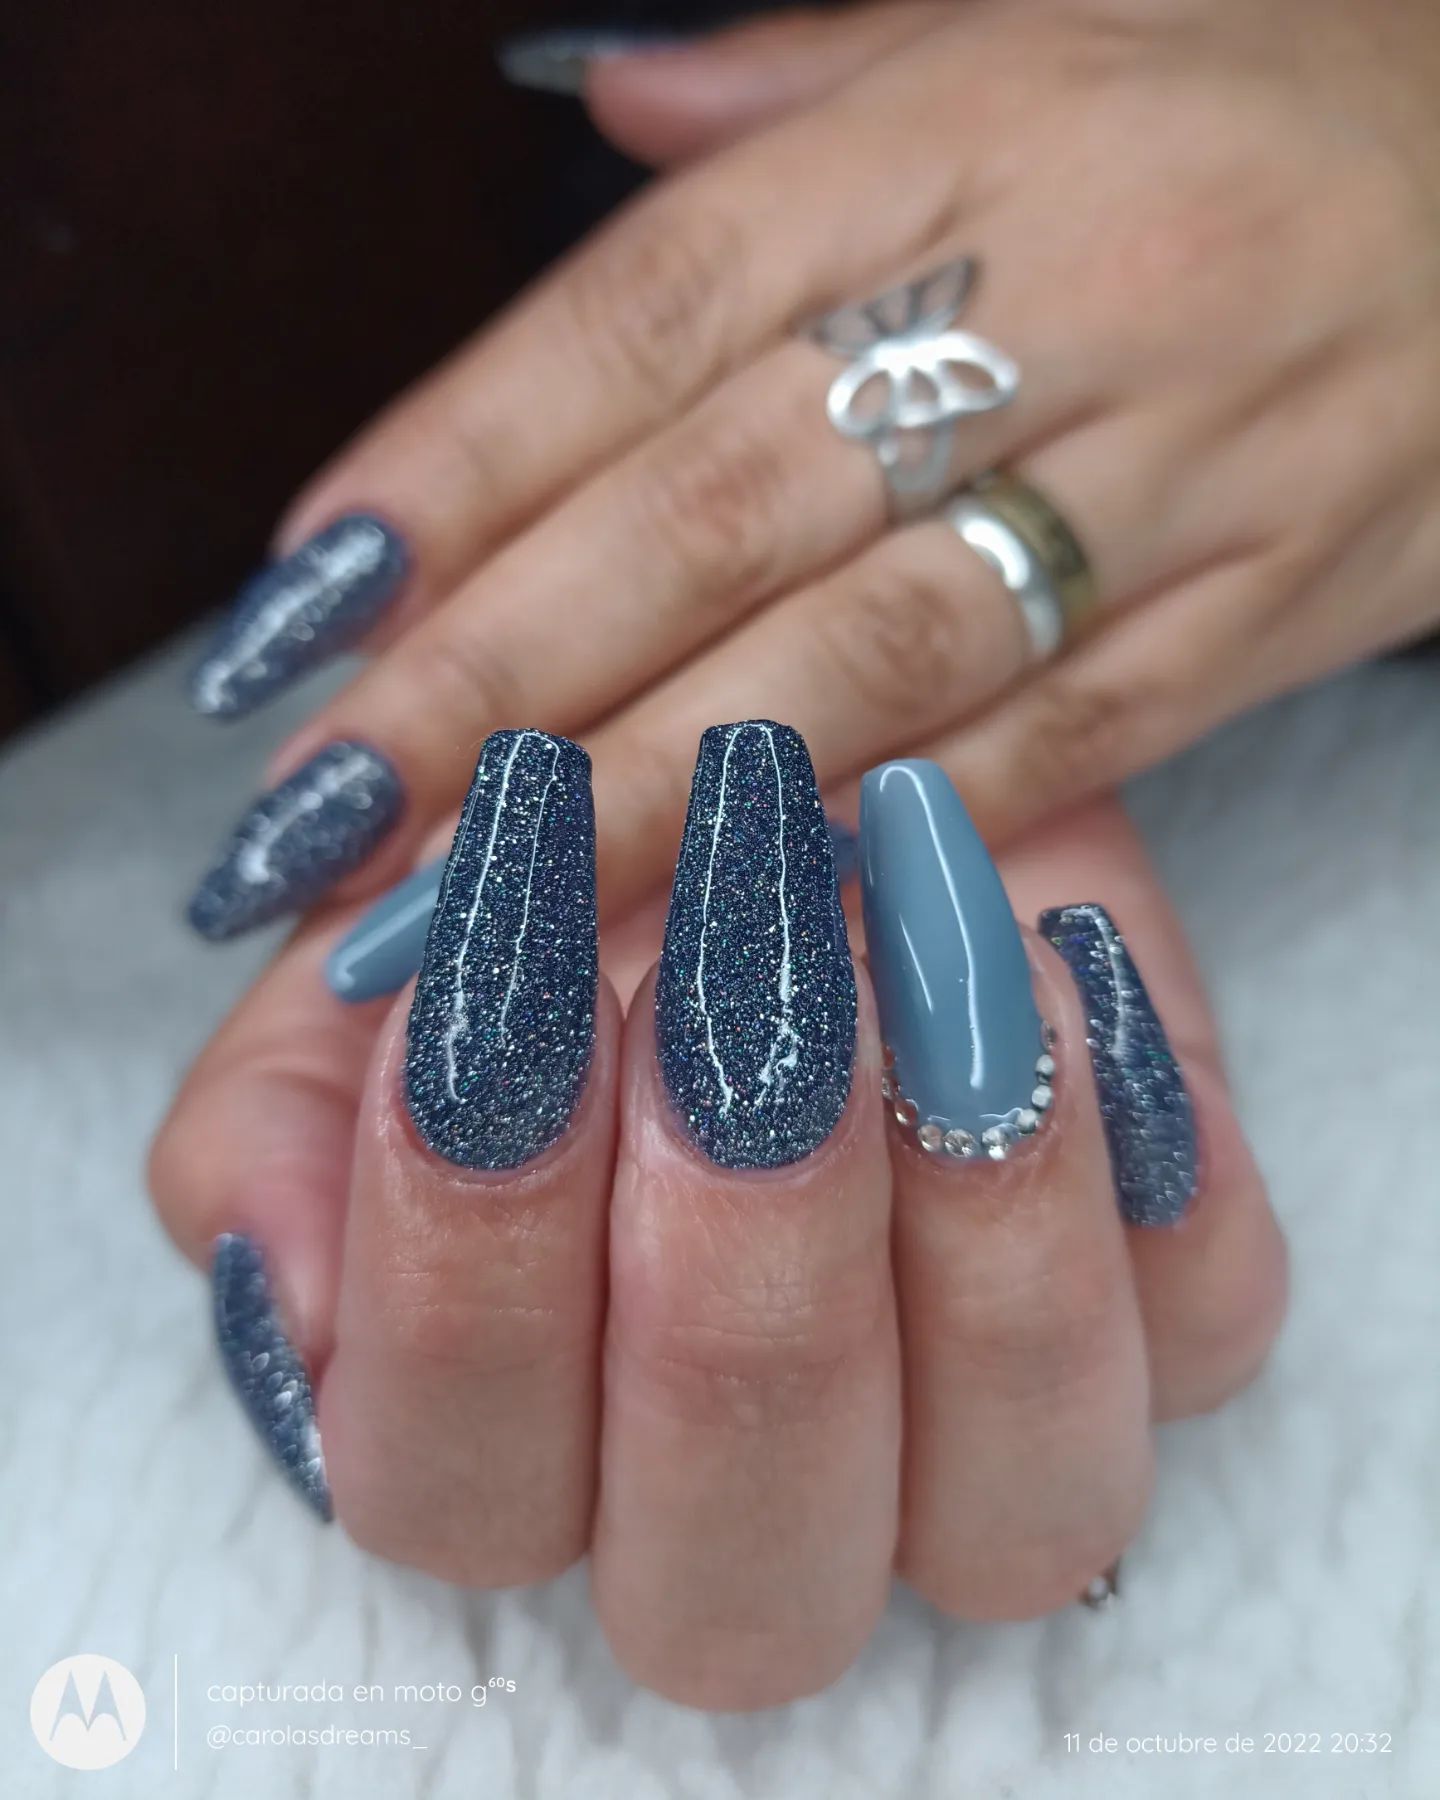 Wanna amaze everyone around you with your nail design? Then, go glossy and shine all the time with your blue nails. The way that blue sparkles against the skin is adorable. It's like you're wearing a light shiny blue dress and it's perfect for any season.